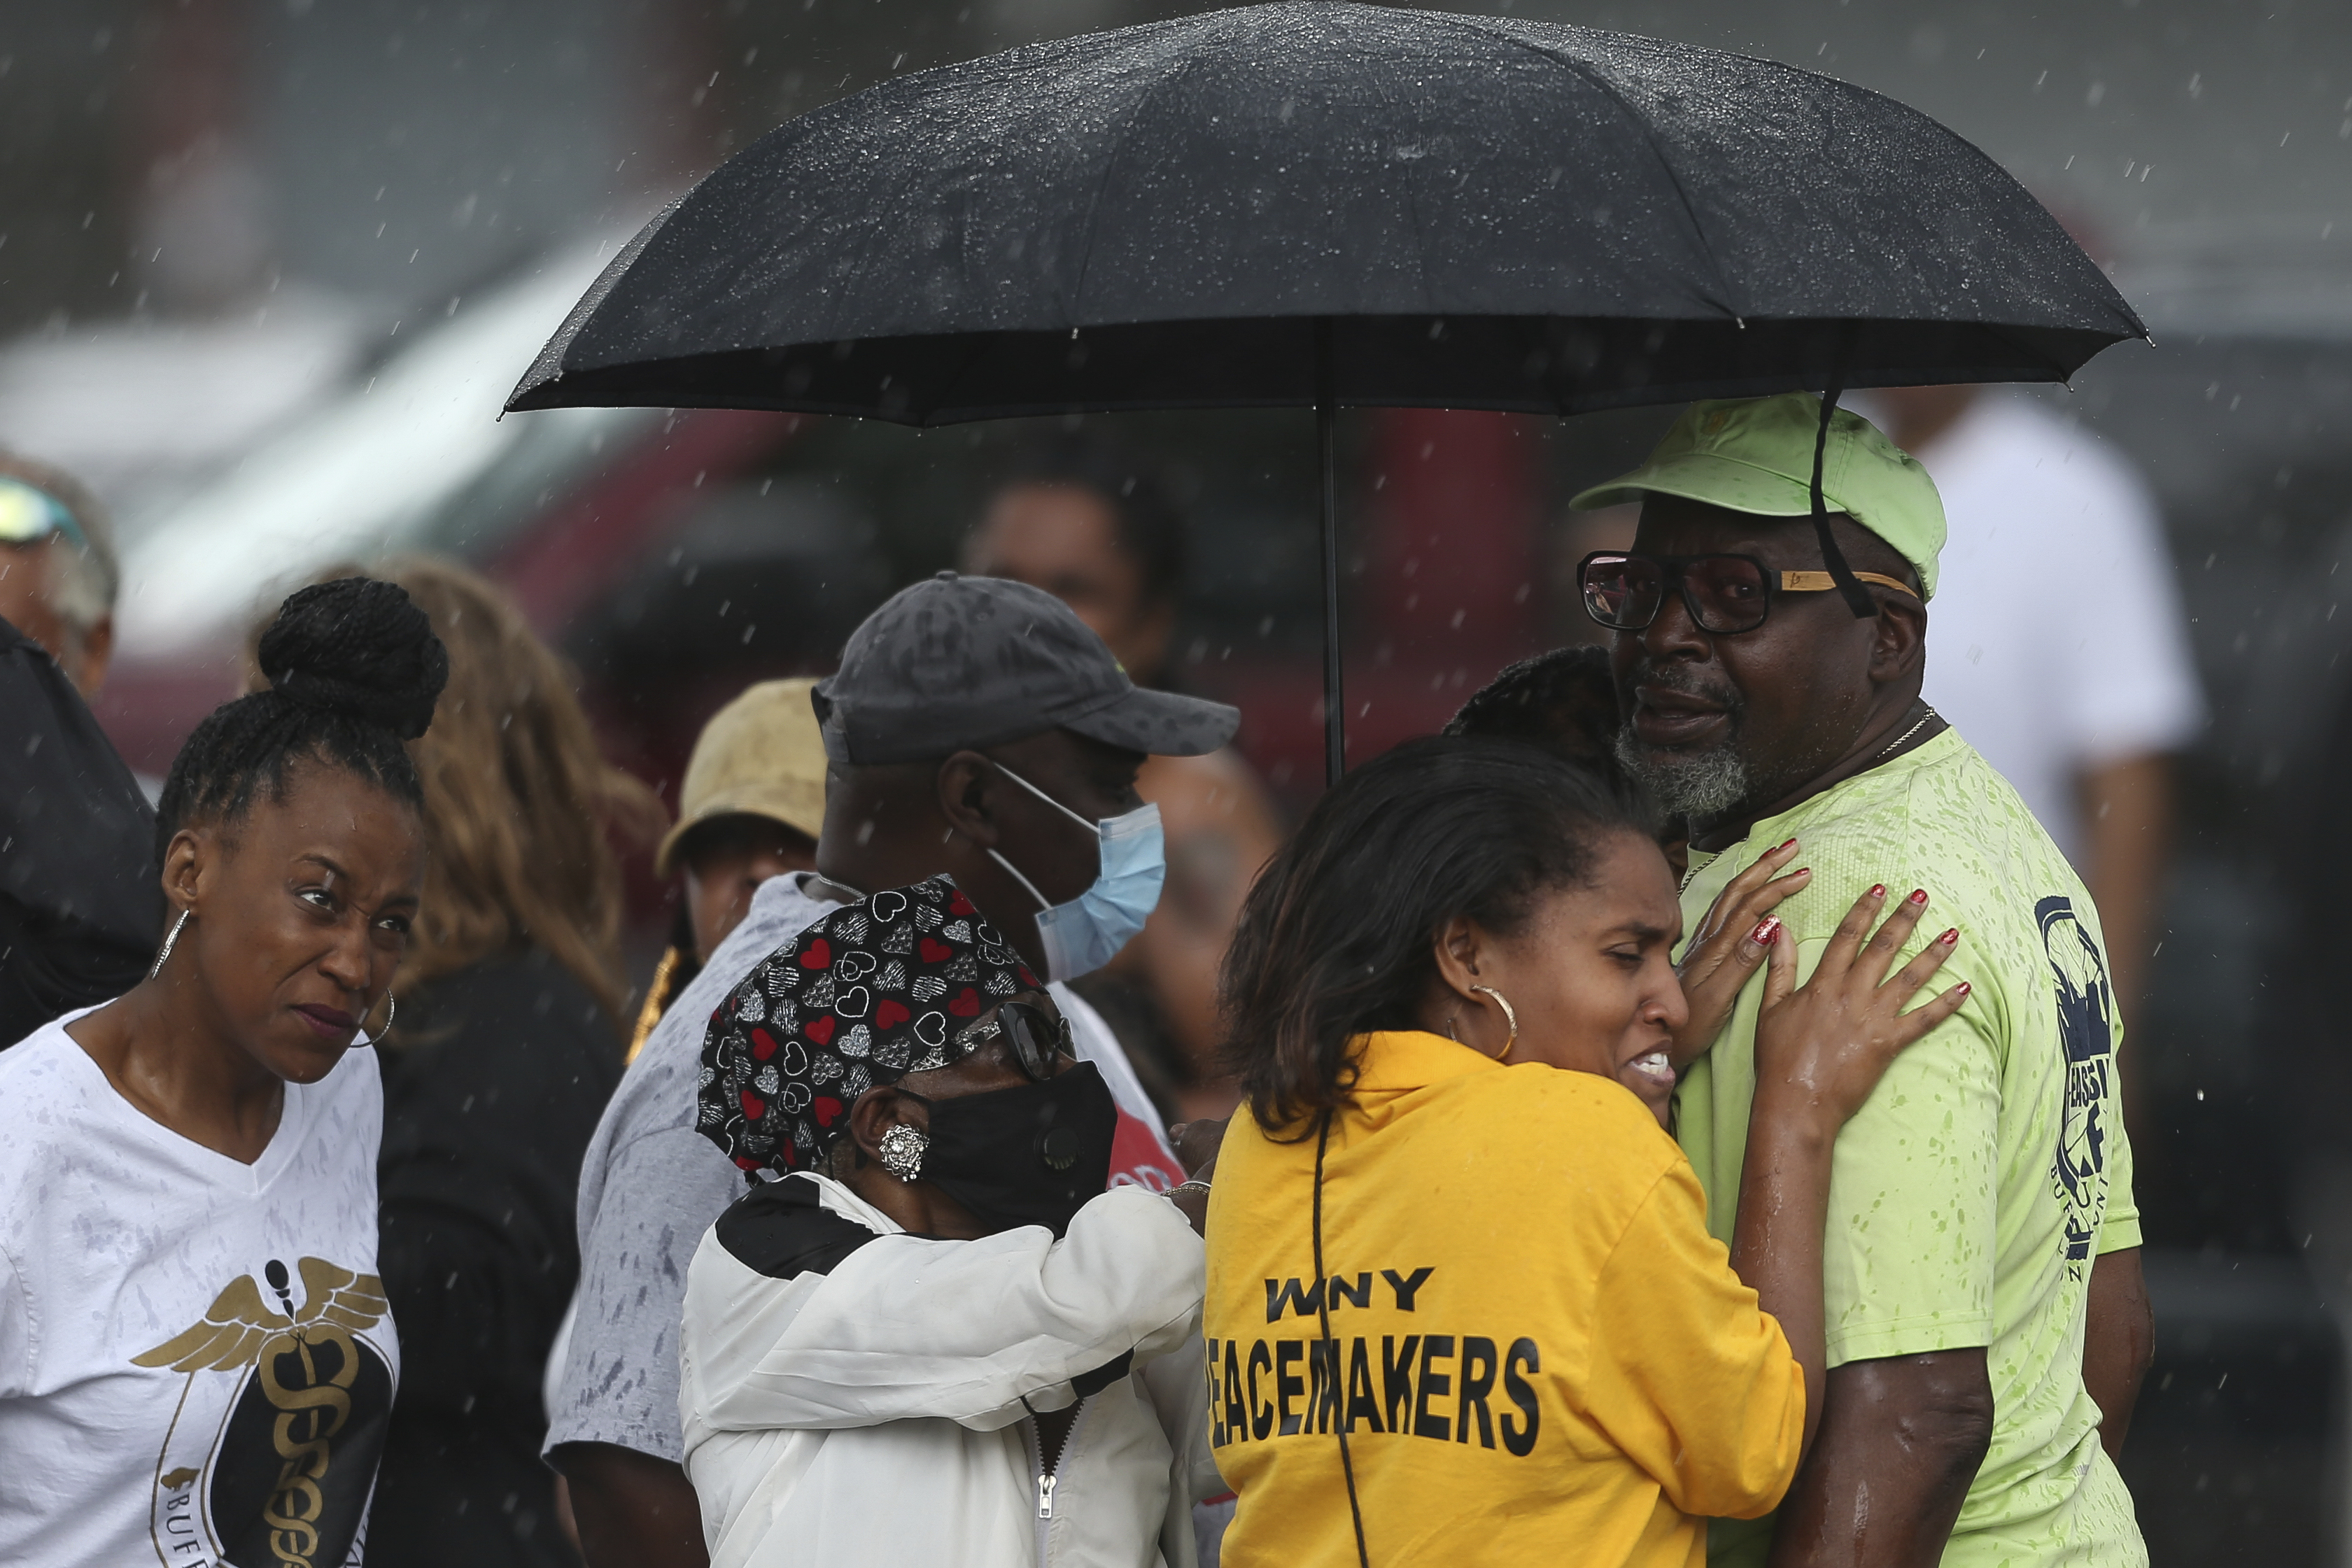 Bystanders gather under an umbrella as rain rolls in after a shooting at a supermarket on Saturday, May 14, 2022, in Buffalo